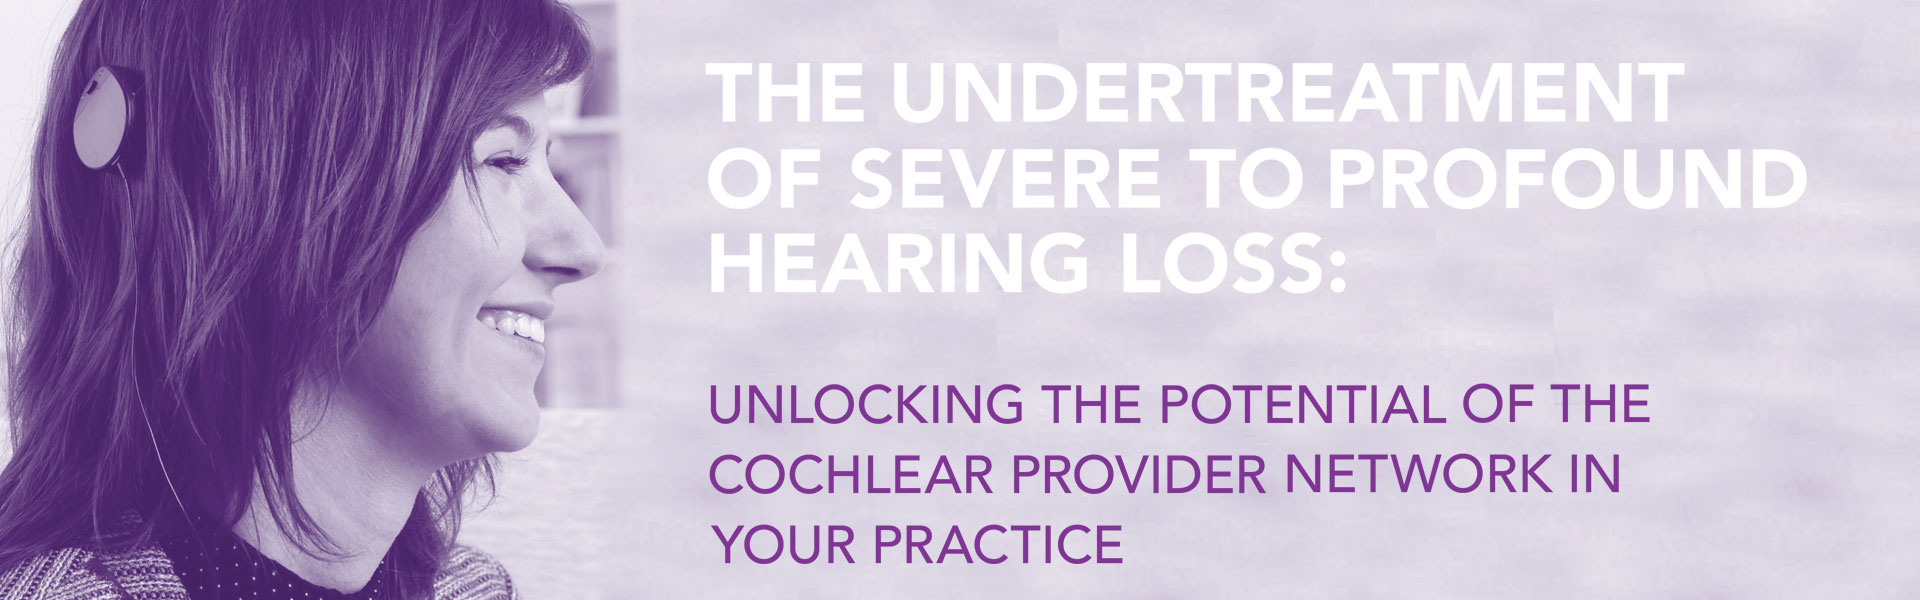 The Undertreatment of Severe to Profound Hearing Loss: Unlocking the Potential of the Cochlear Provider Network in your Practice